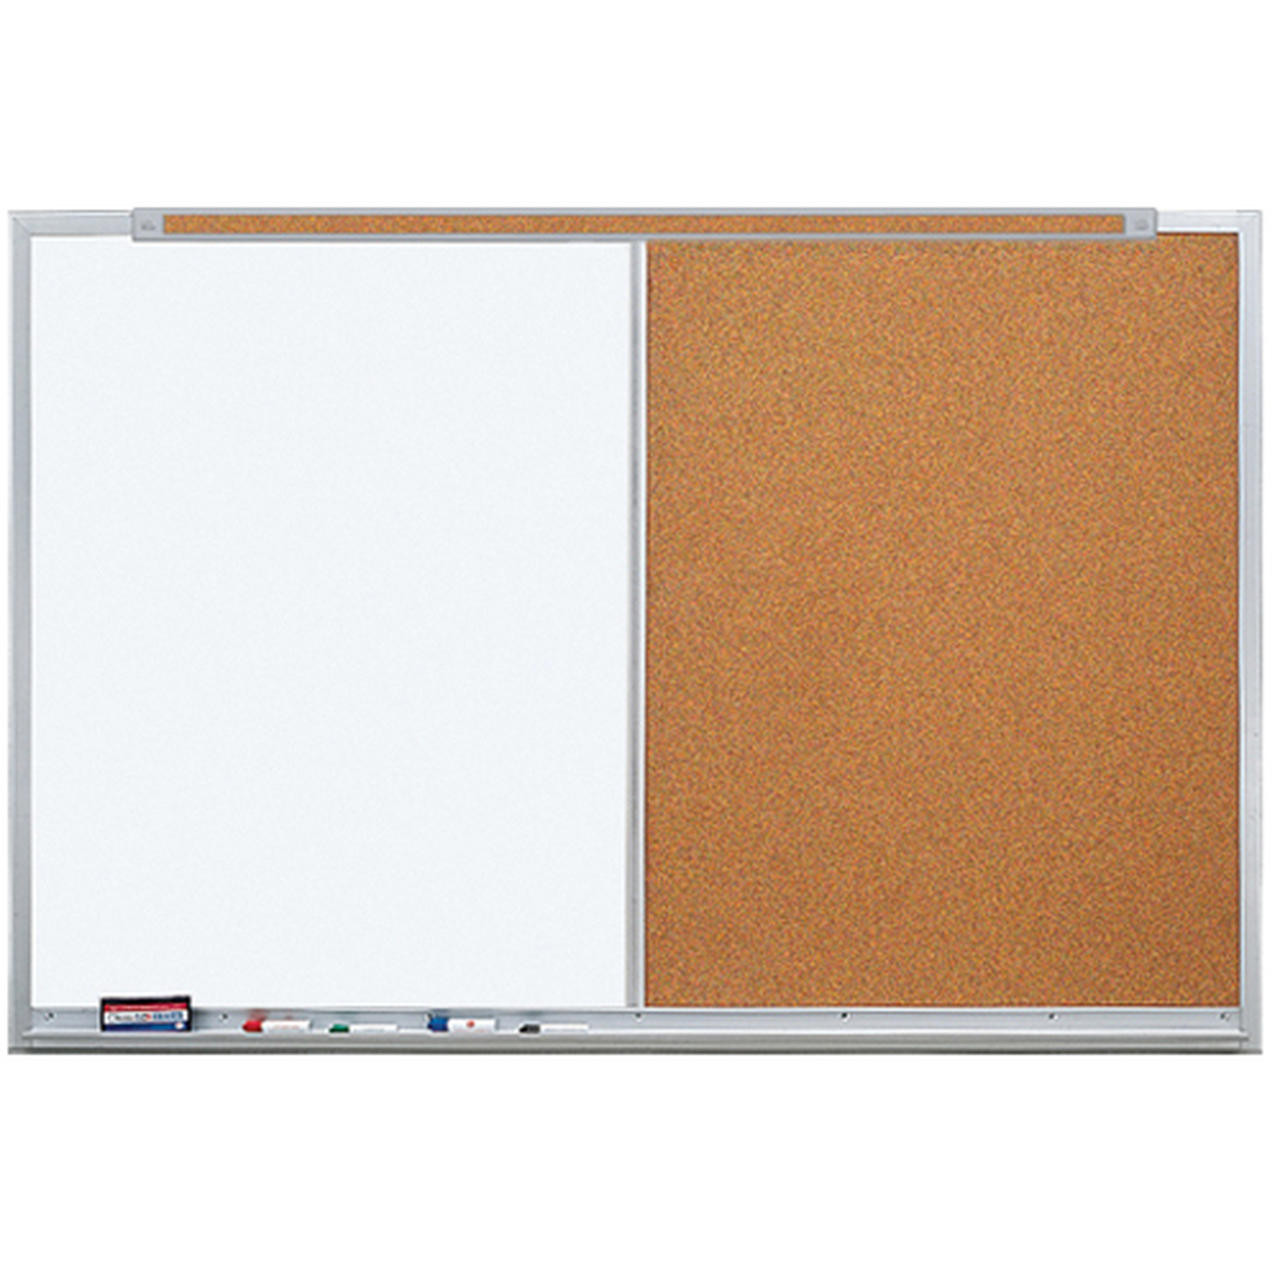 claridge-lcs-deluxe-combo-board-half-porcelain-steel-half-tan-cork-with-select-frame-and-map-rail-4h/